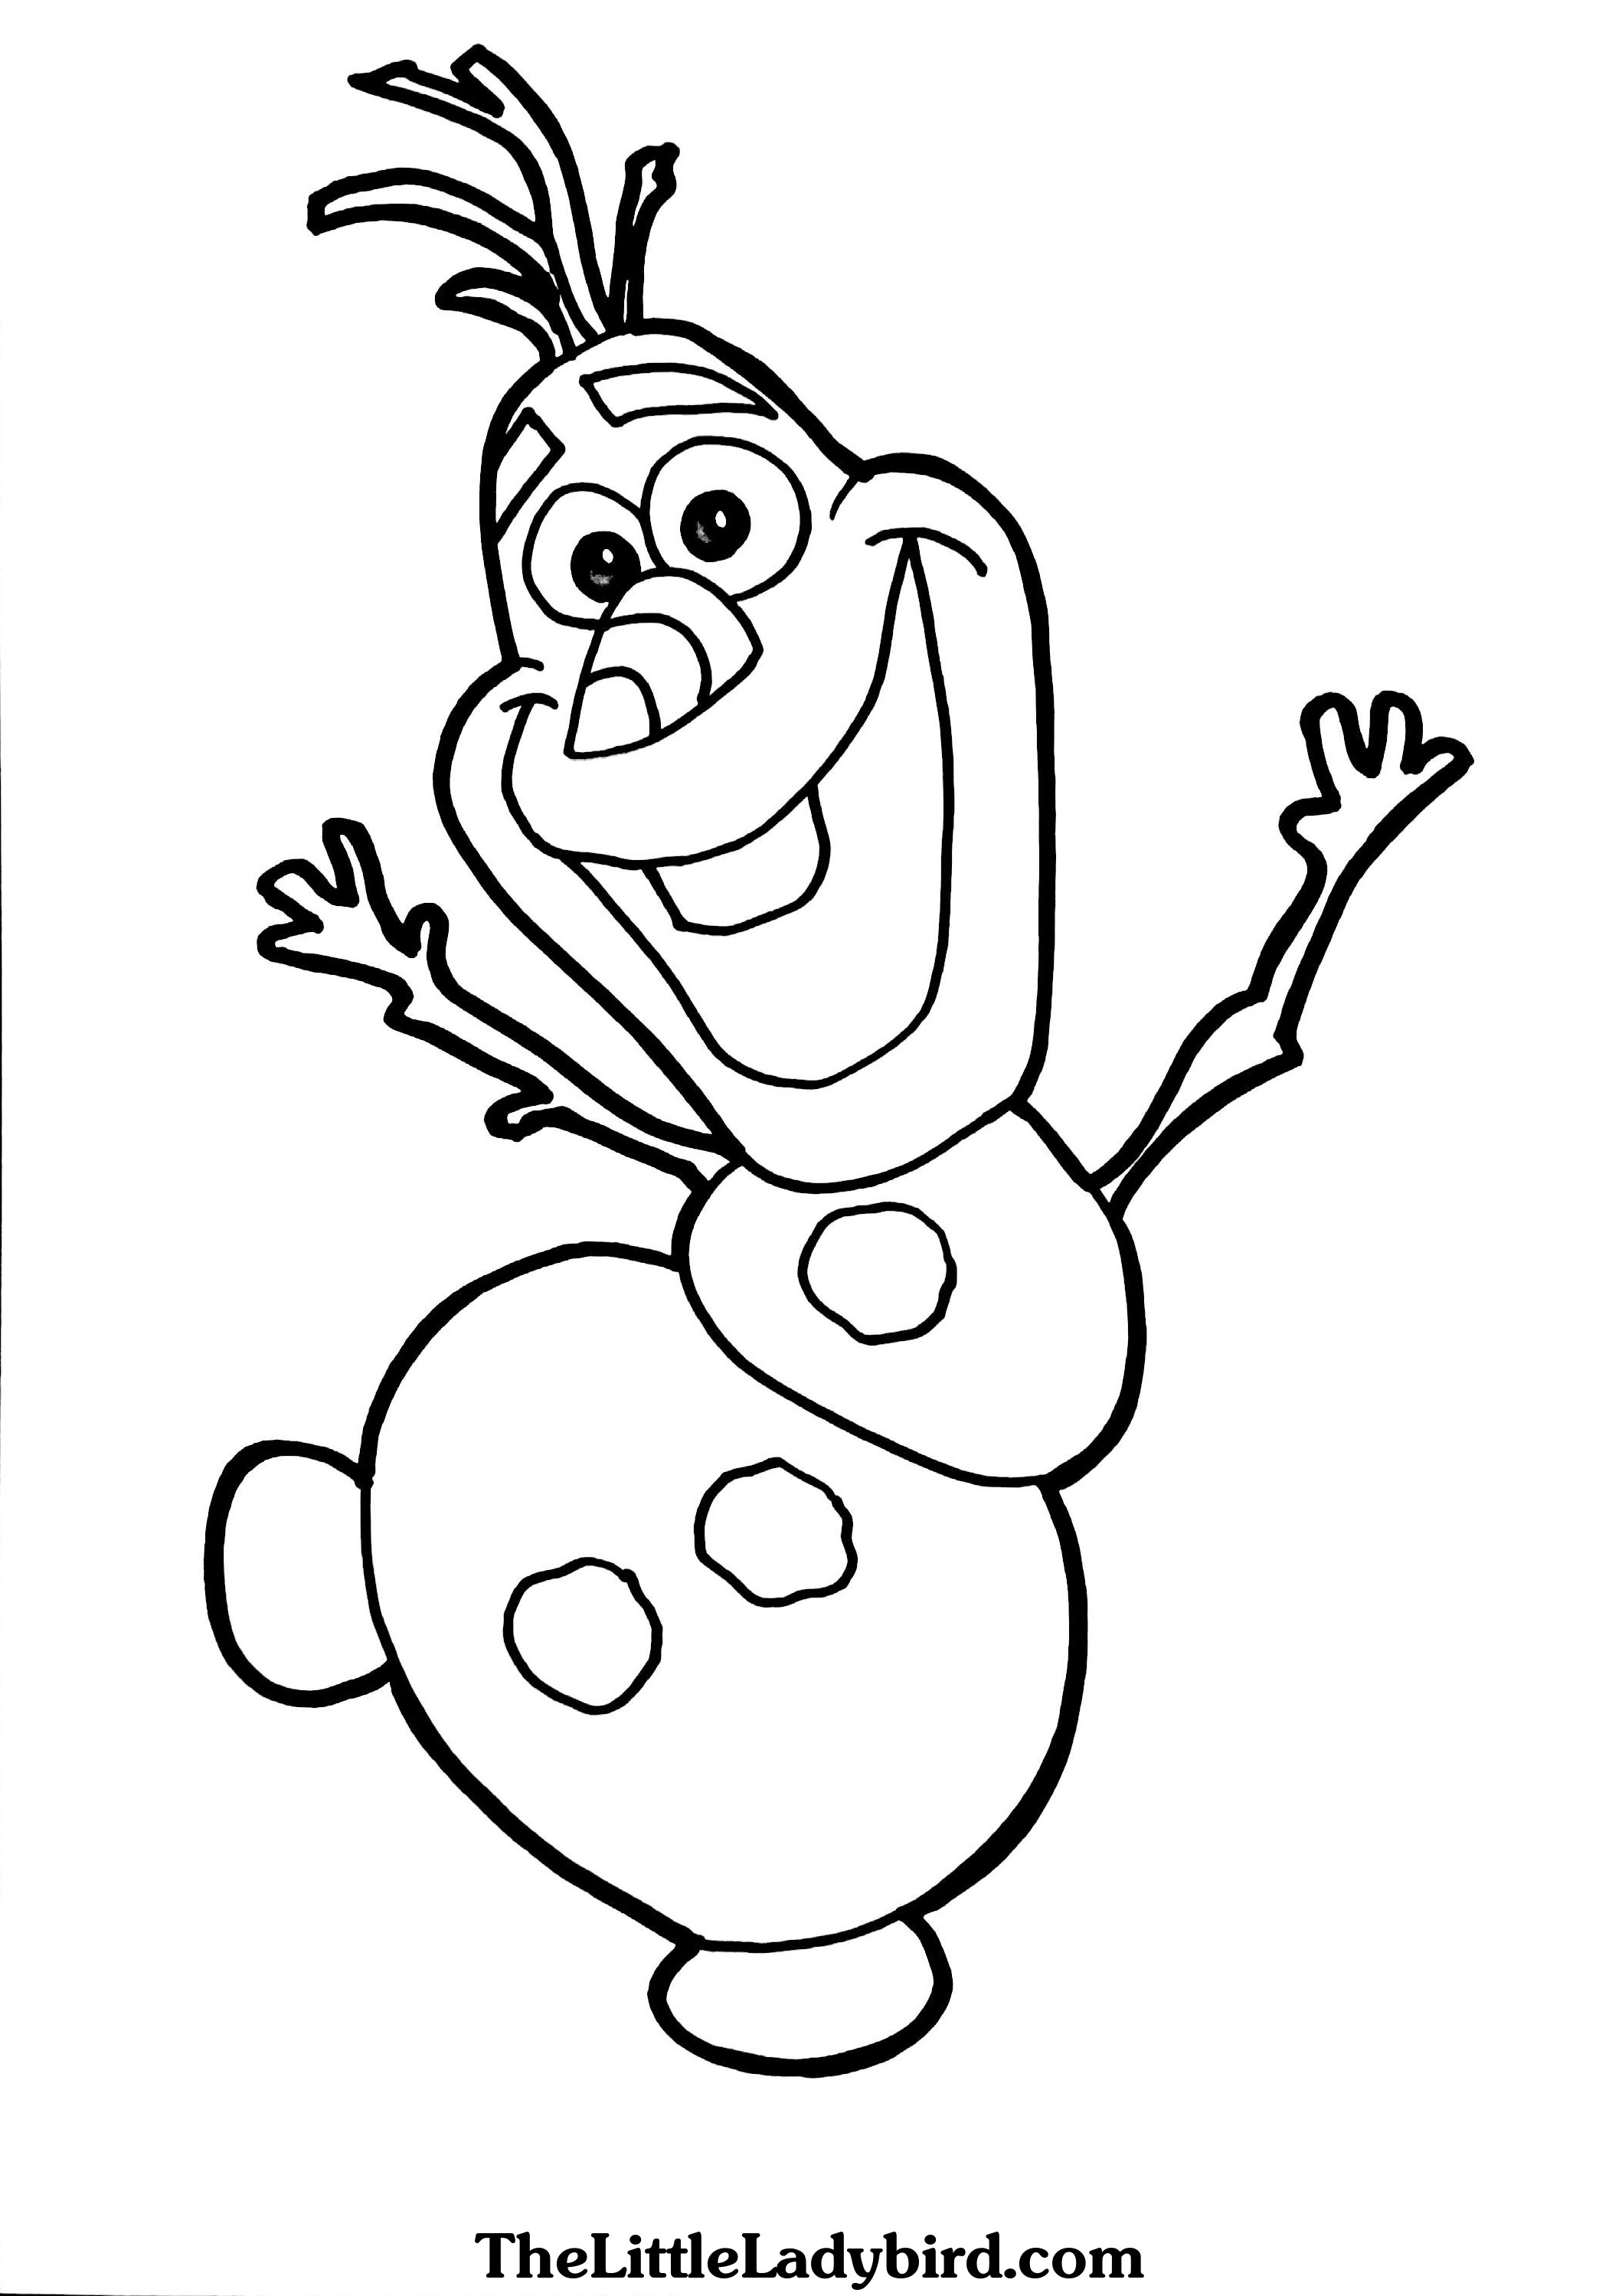 Frozen Coloring Pages For Toddlers at GetDrawings | Free ...